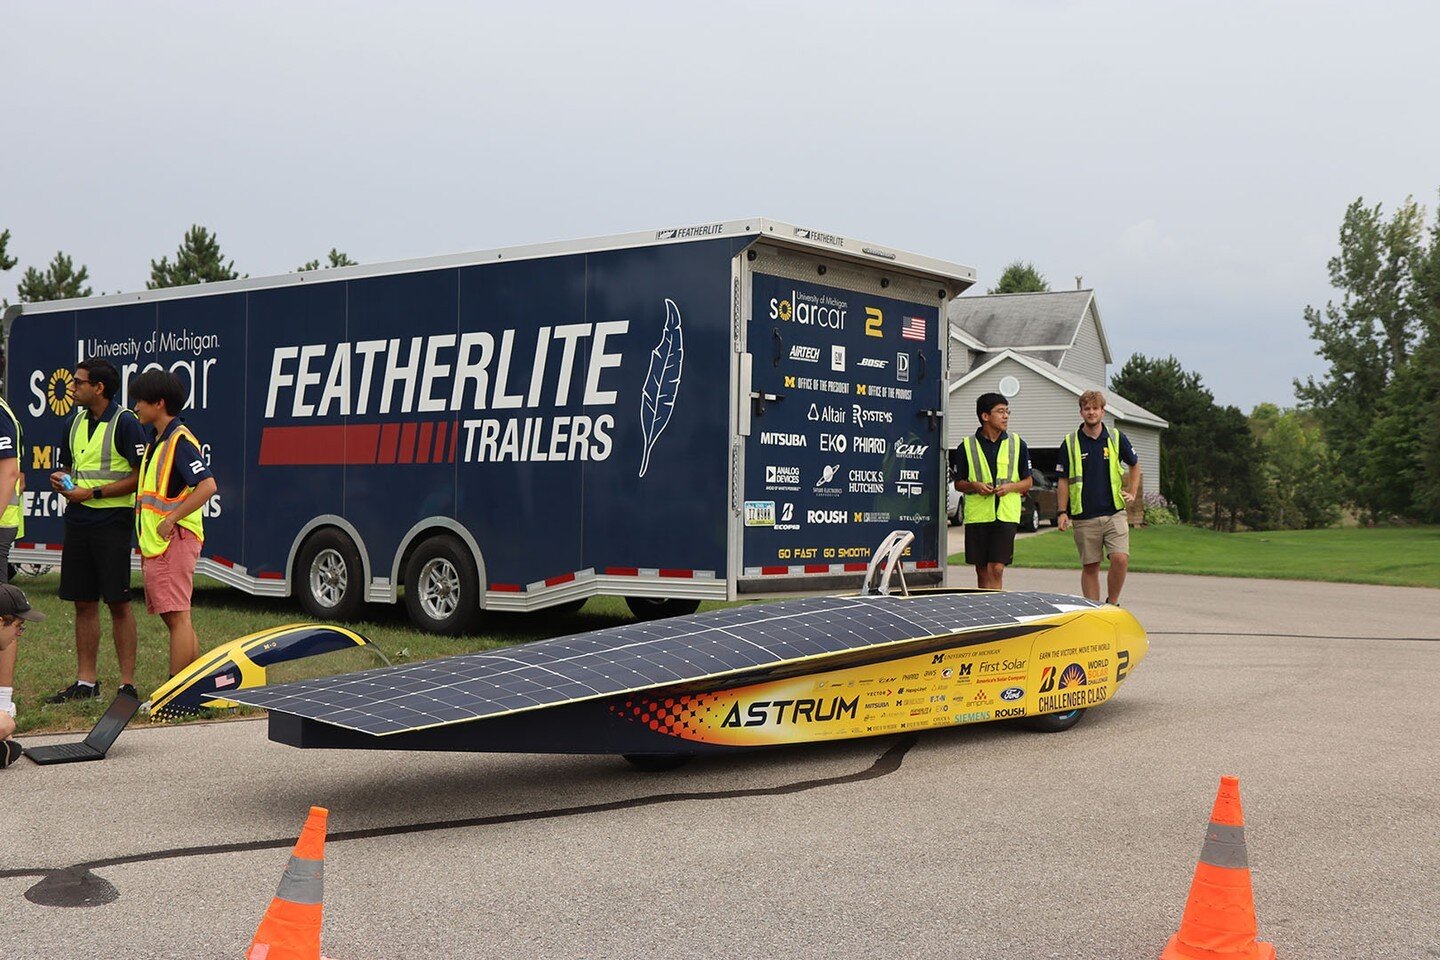 Meet our trailer, Astrum&rsquo;s stylish go to mode of transportation when not racing. Our Featherlite trailer is lightweight and extremely durable allowing us to securely strap in Astrum and bring the solar car from one event to the next. Thank you 